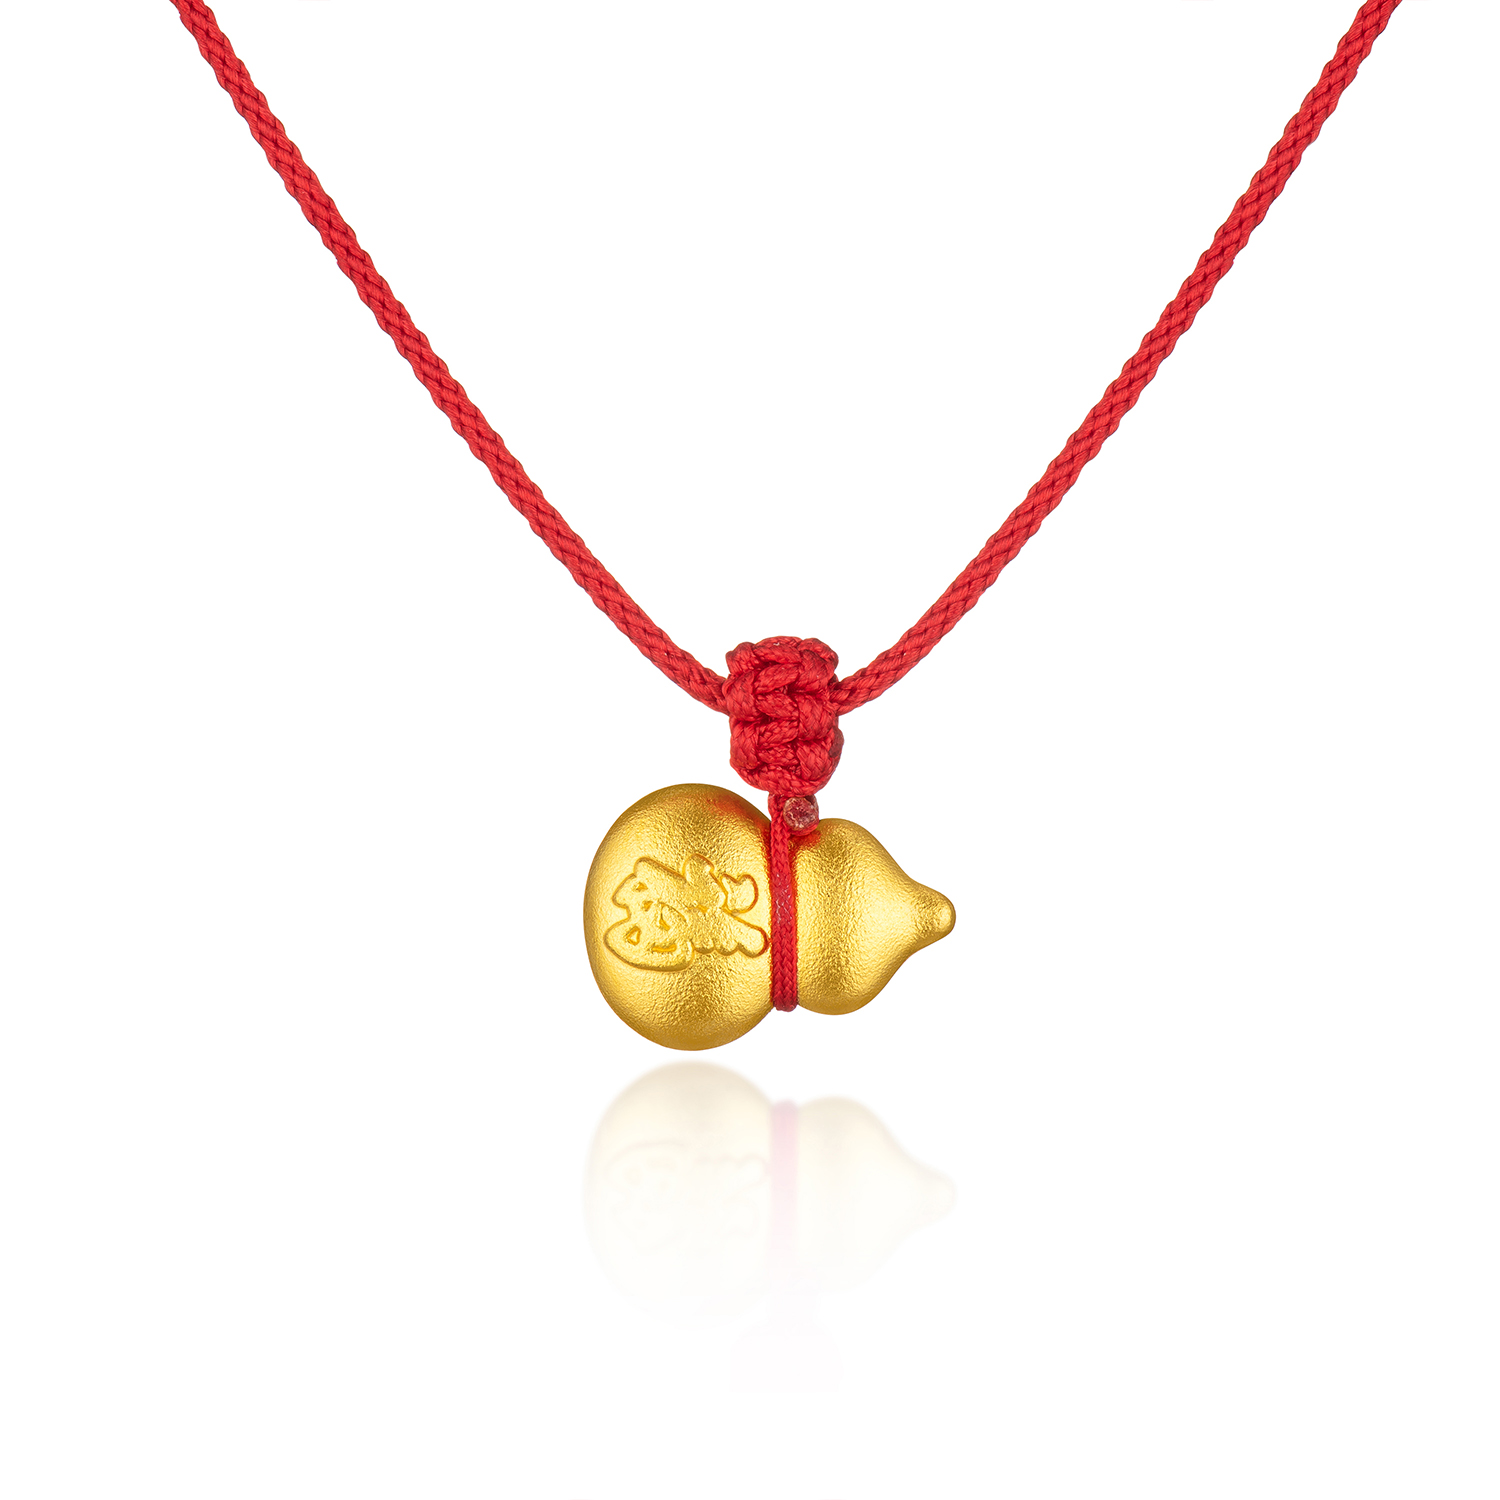 Heirloom Fortune Collection “Endless Fortune” Gold Pendant